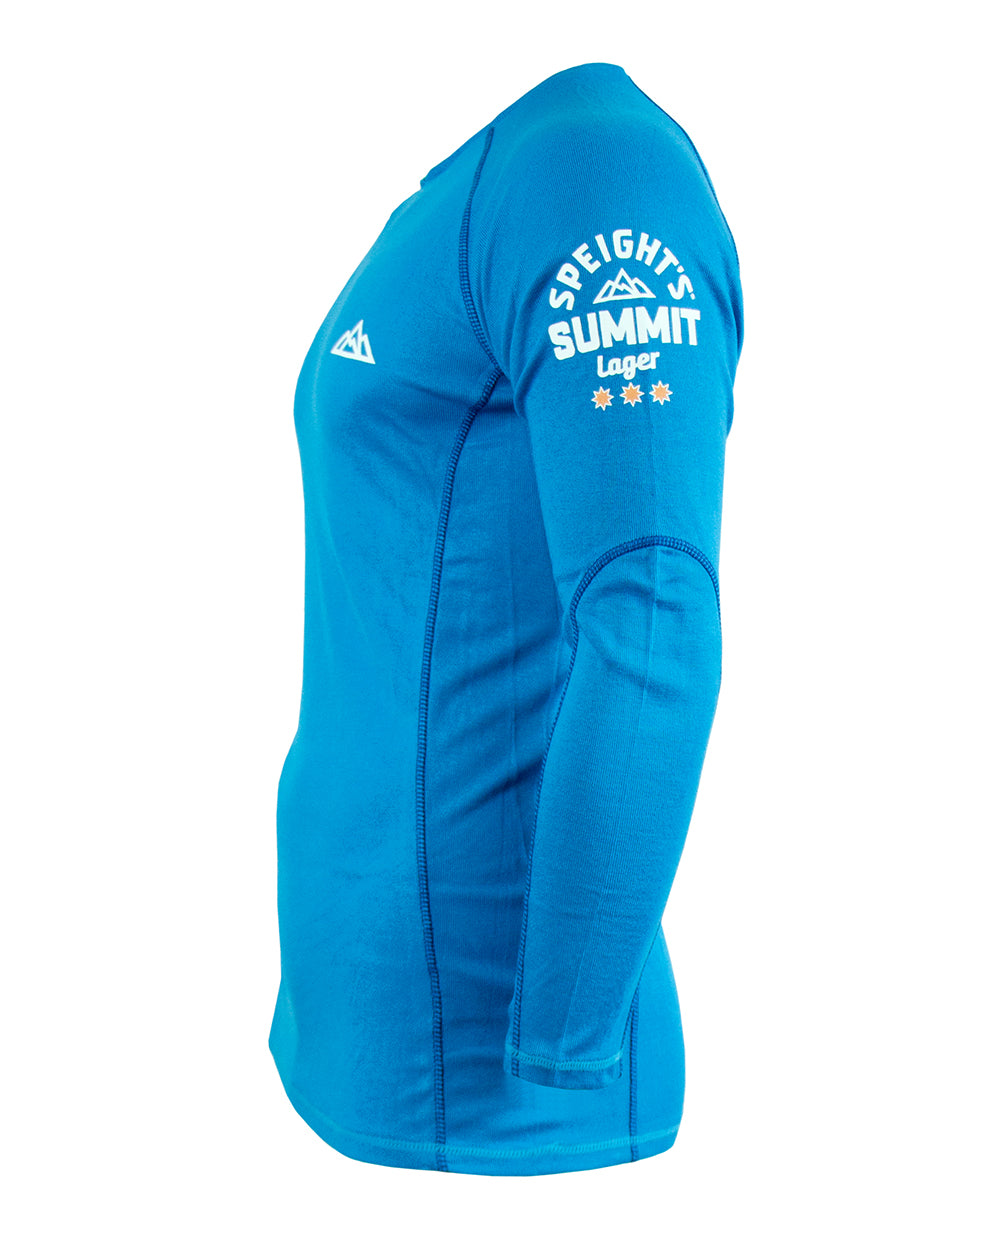 Speight's Summit Thermal -  Beer Gear Apparel & Merchandise - Speights - Lion Red - VB - Tokyo Dy merch